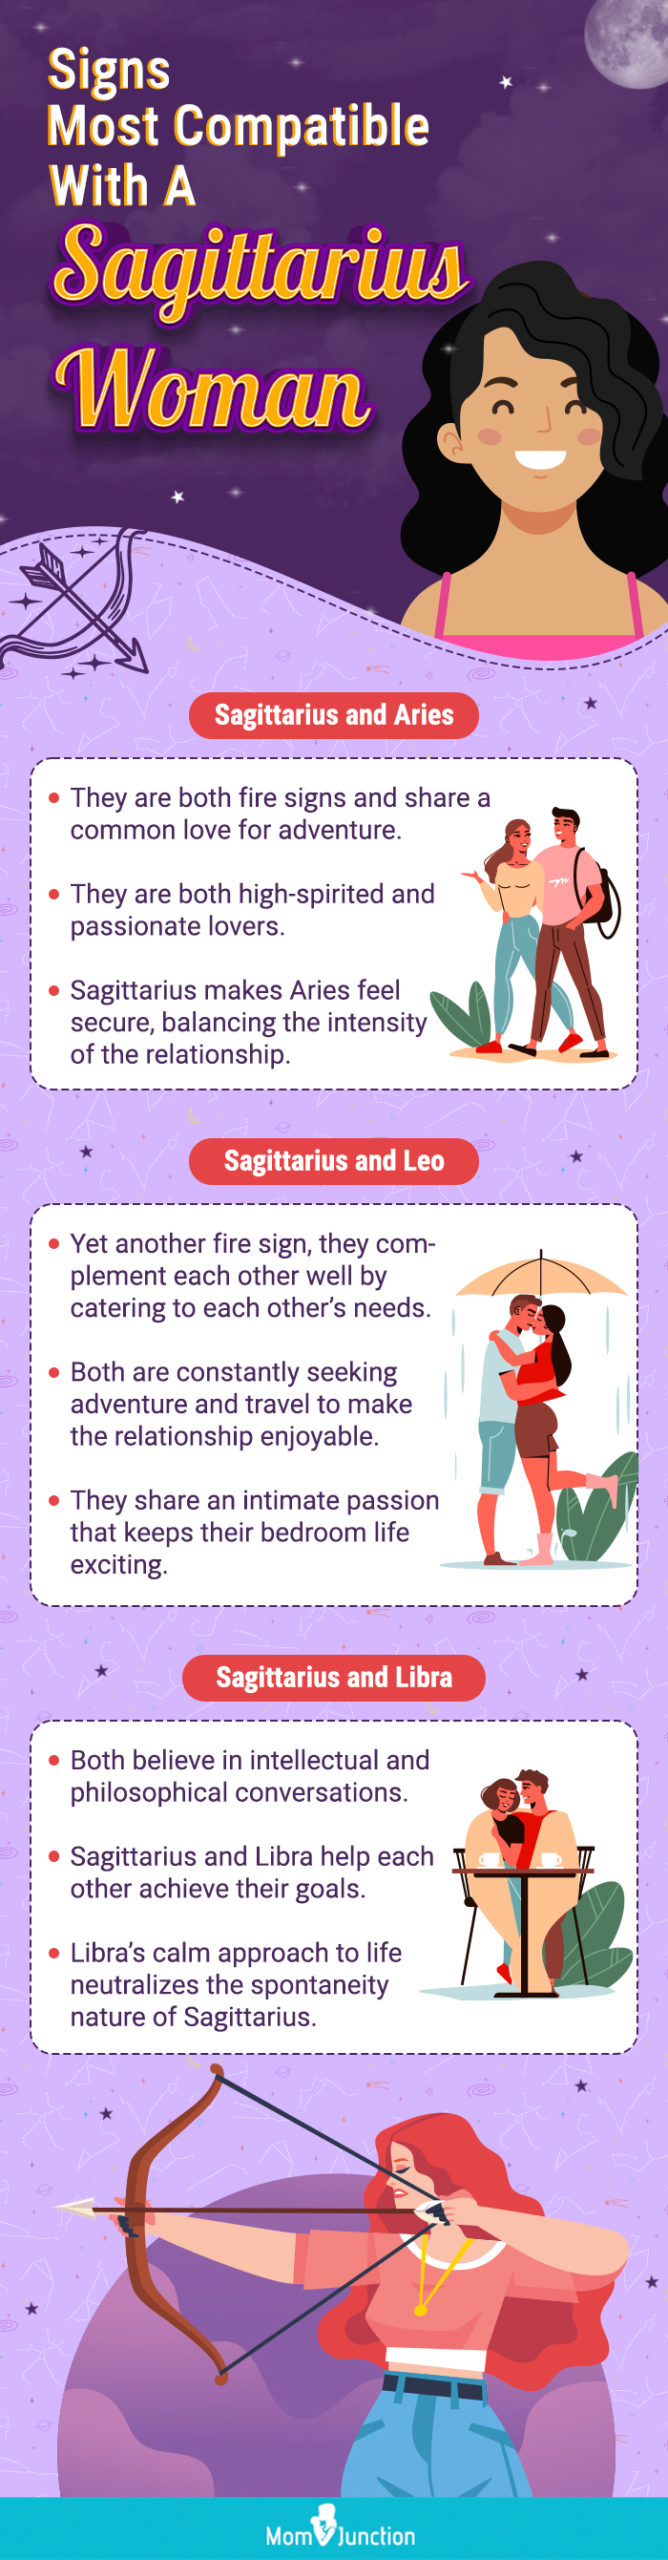 signs most compatible with a sagittarius woman (infographic)